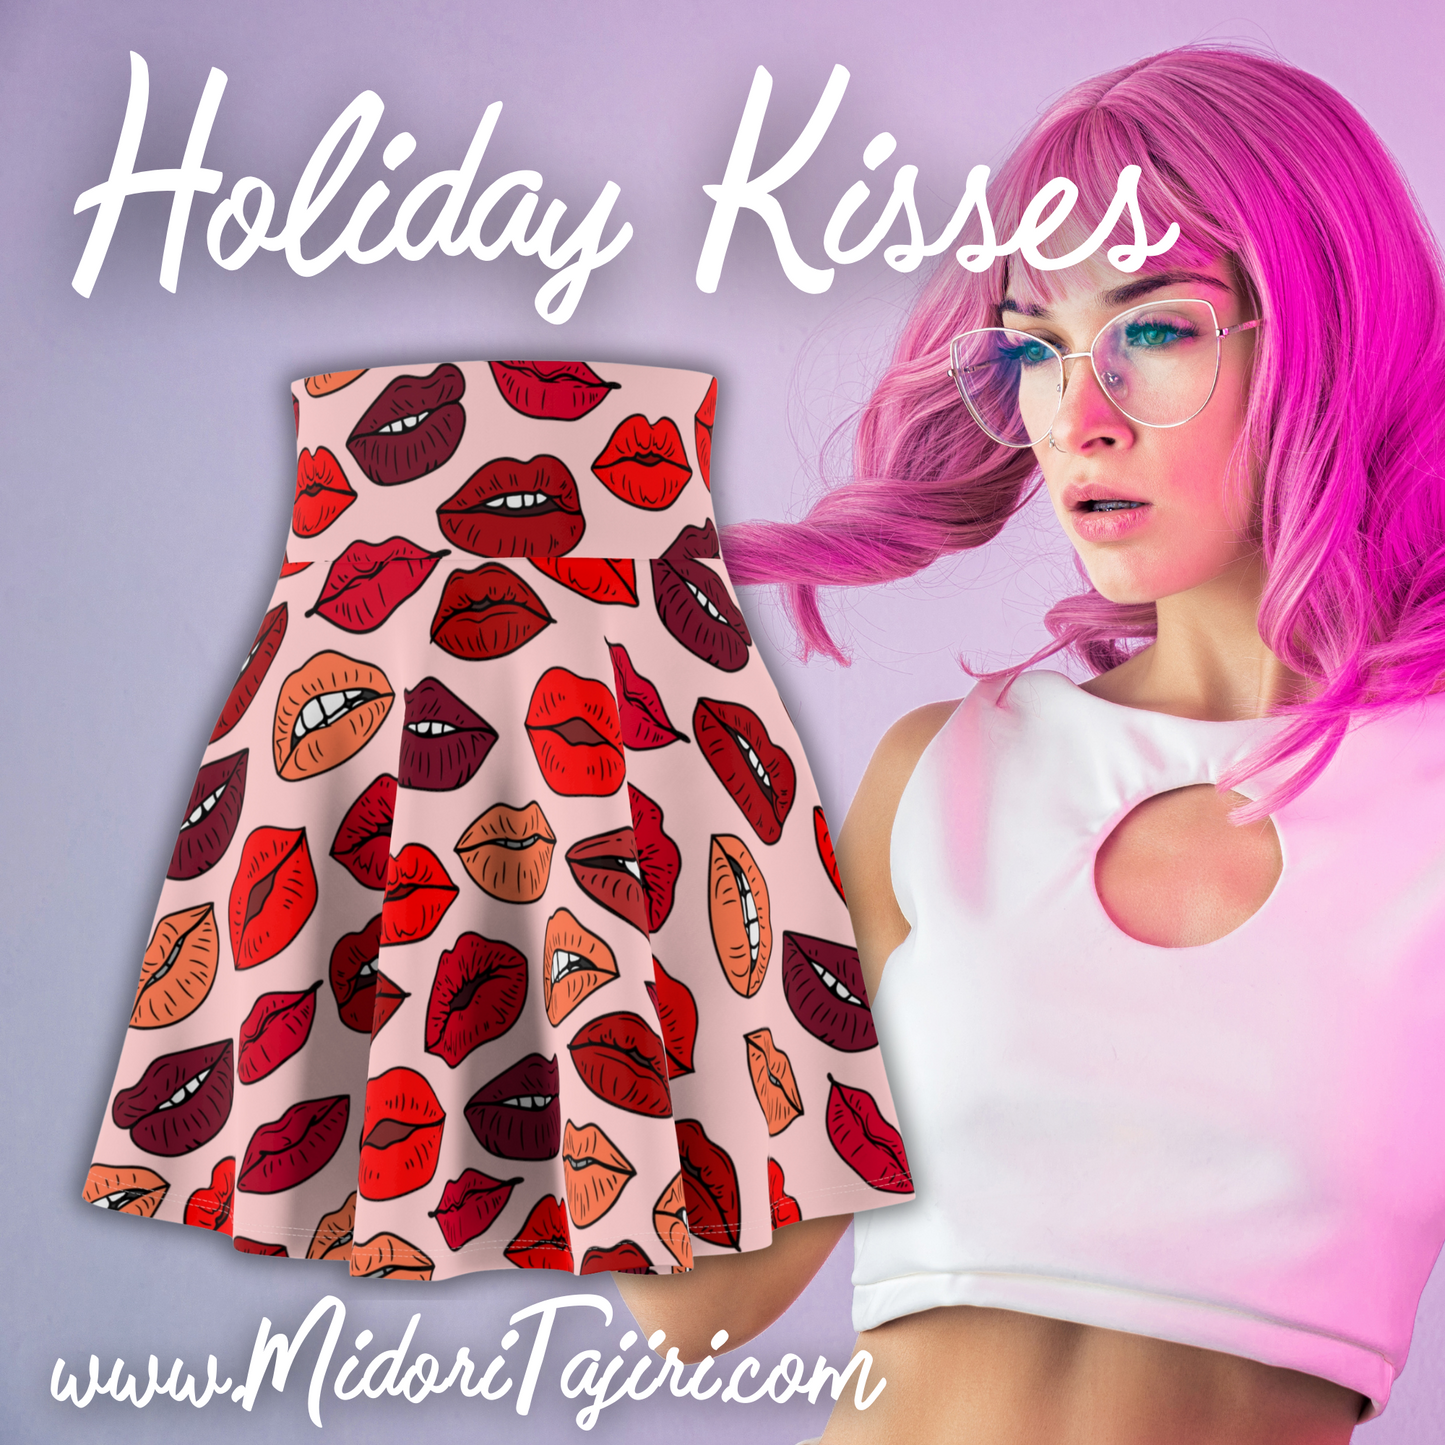 Retro Pink & Red Kiss Lips Skater Skirt, Valentine Holiday Harajuku Group Cosplay Costume, Girlfriend Bestie BFF Gift, High Waisted y2k 90s Skirt